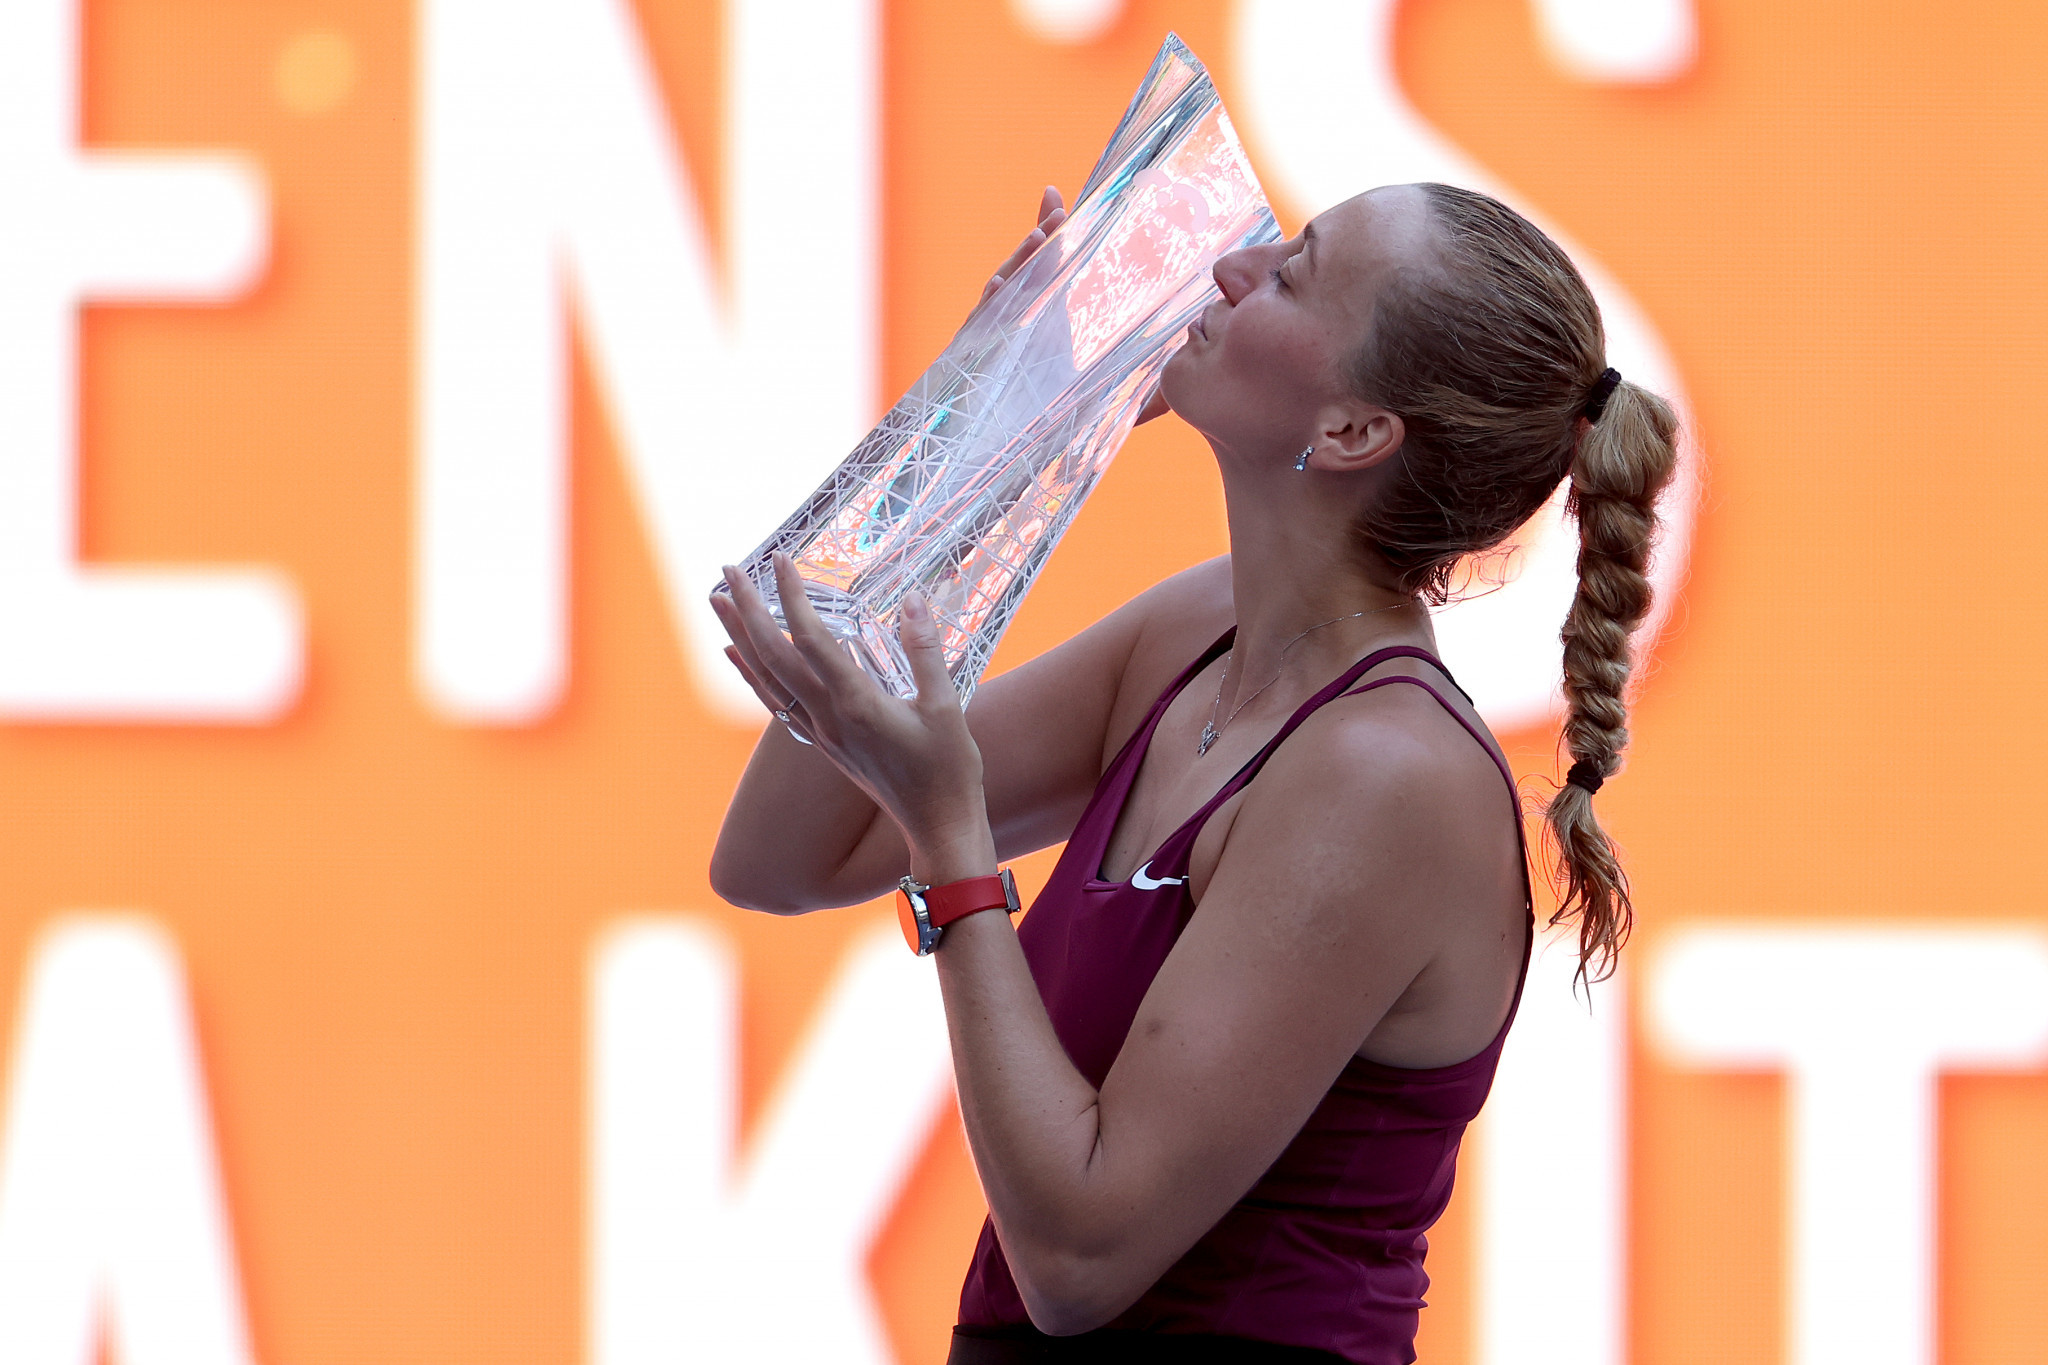 Kvitová wins first Masters 1000 title since 2018 in Miami